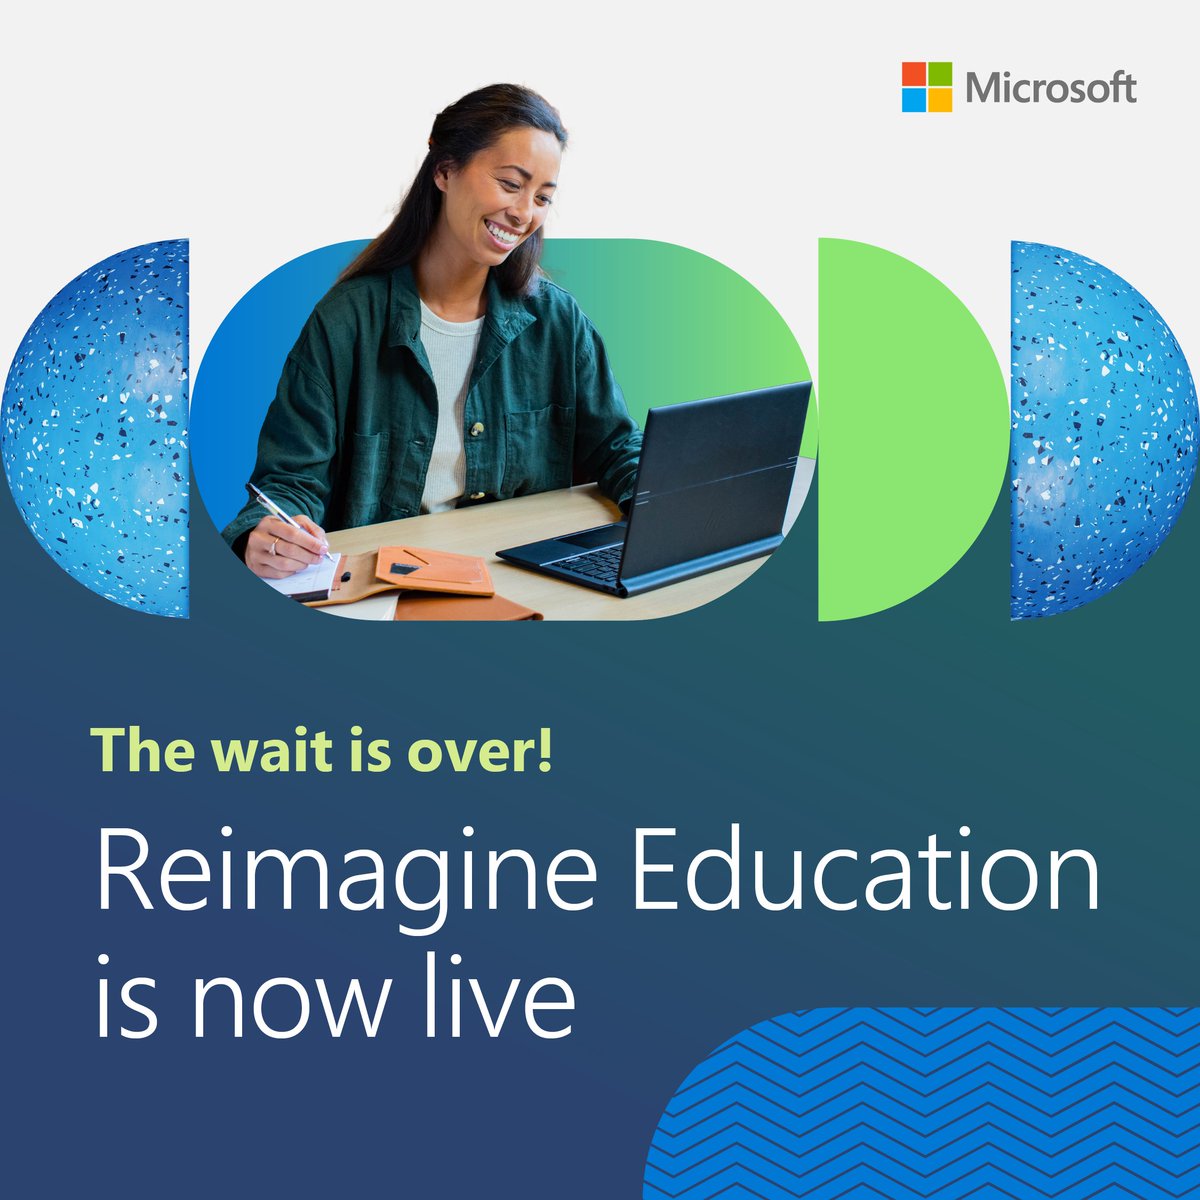 Missed the first #MicrosoftReimagine? You're in luck - we're going live again!
​
Join the stream to learn how #AI in education brings opportunity to life: youtube.com/live/xlAwmegTX…
​
#MicrosoftEDU #MicrosoftReimagine